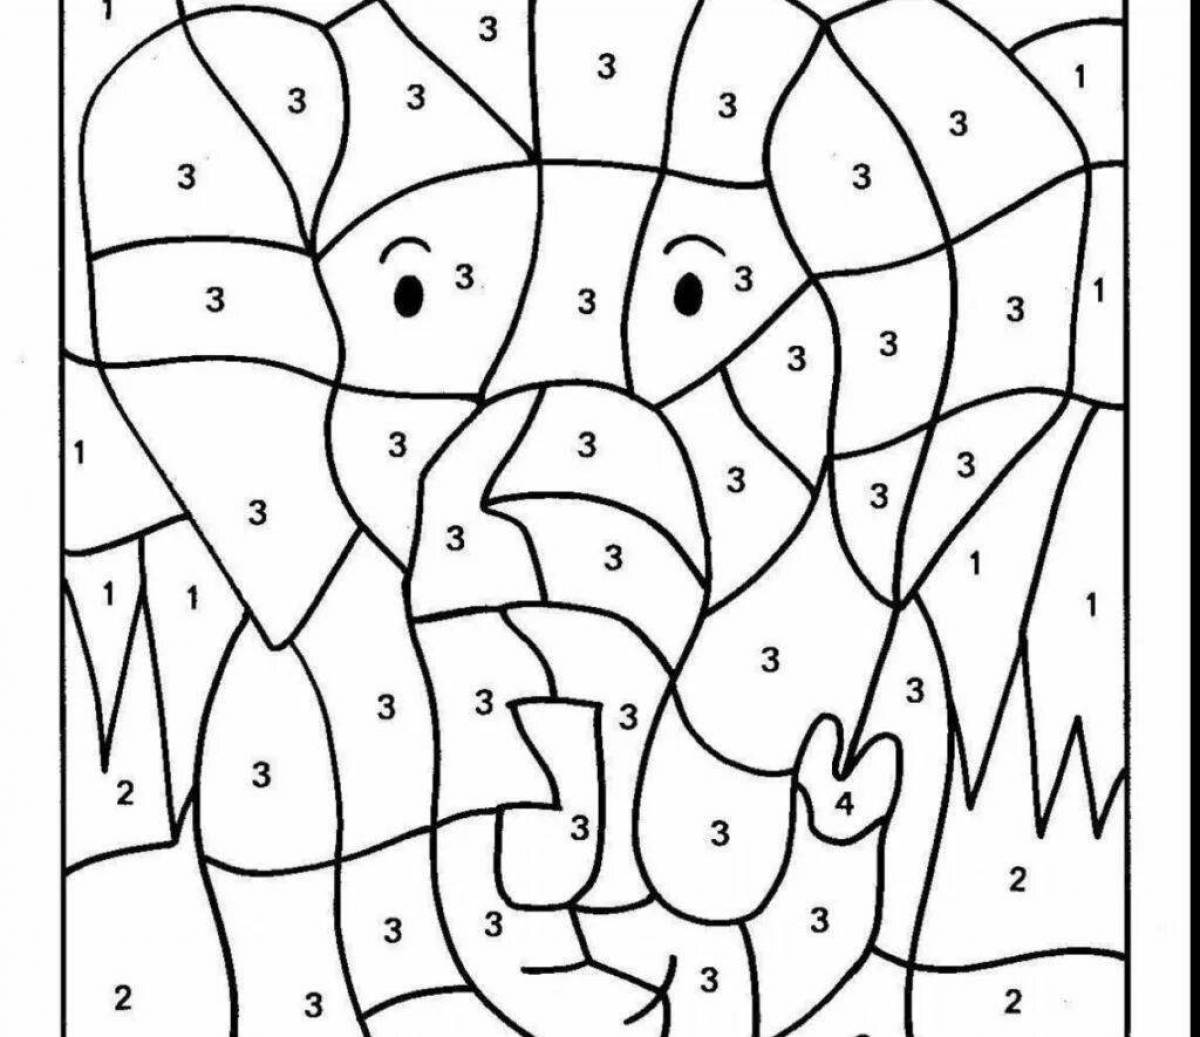 Fun coloring game by cells and numbers